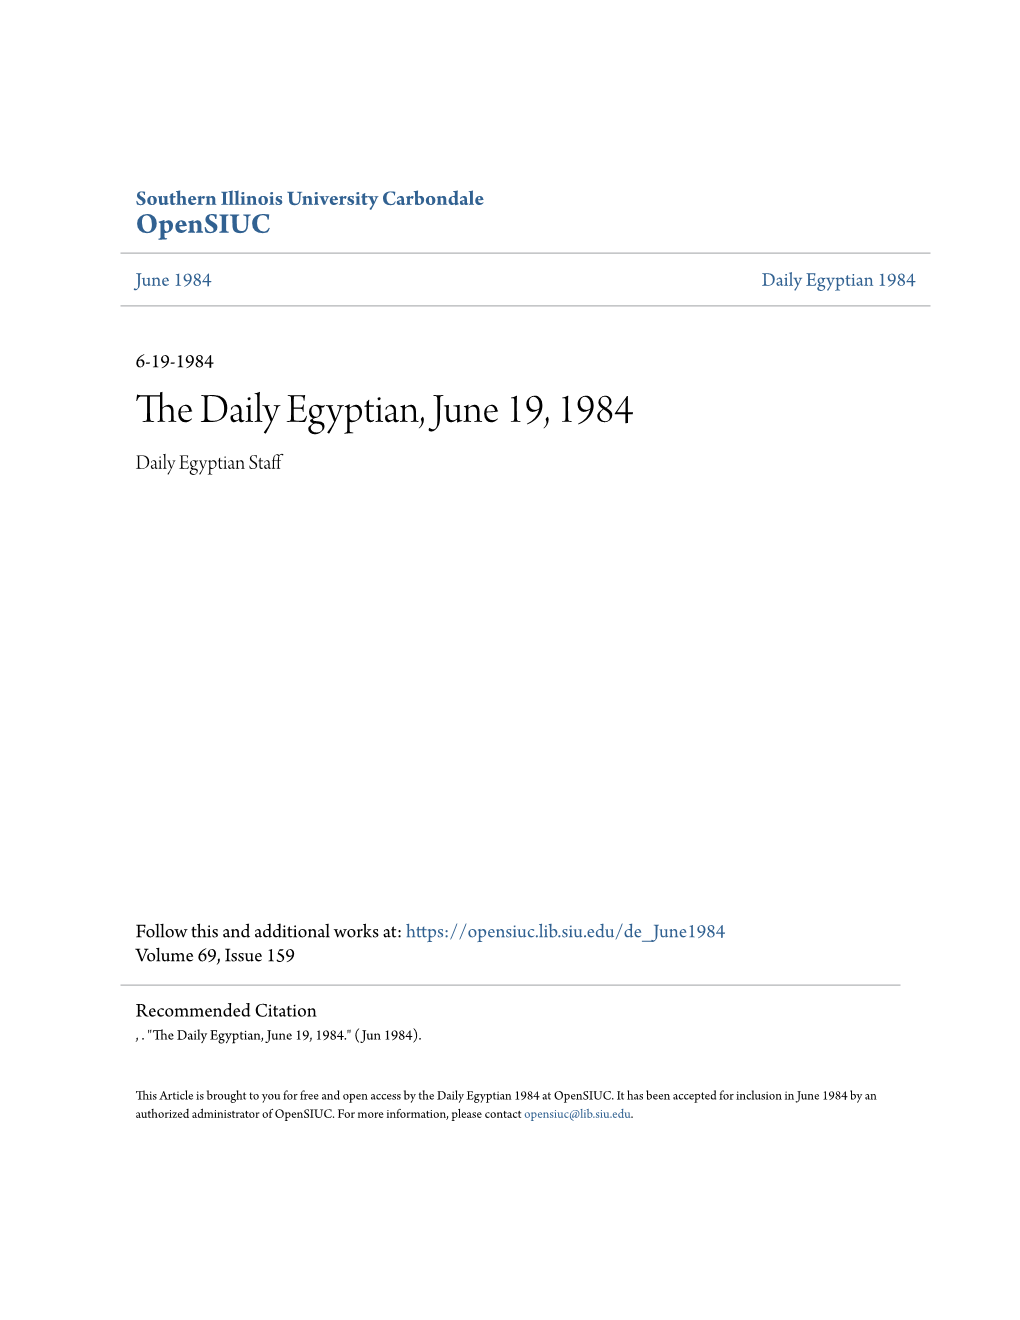 The Daily Egyptian, June 19, 1984